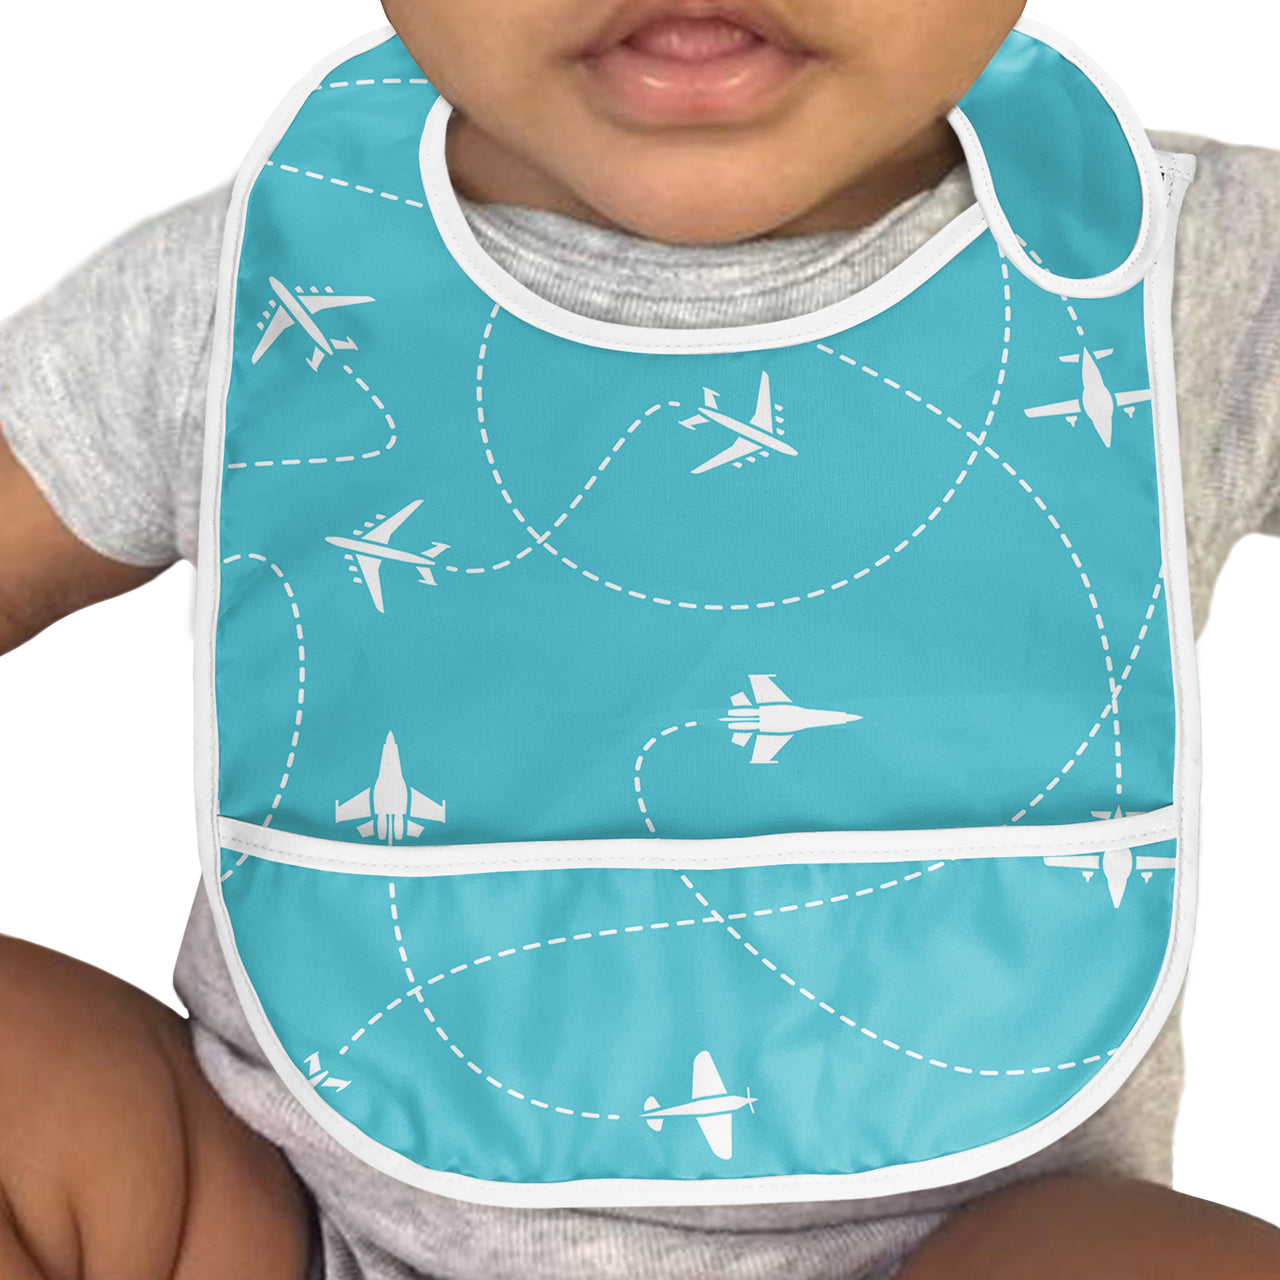 Travel The The World By Plane Designed Baby Bib